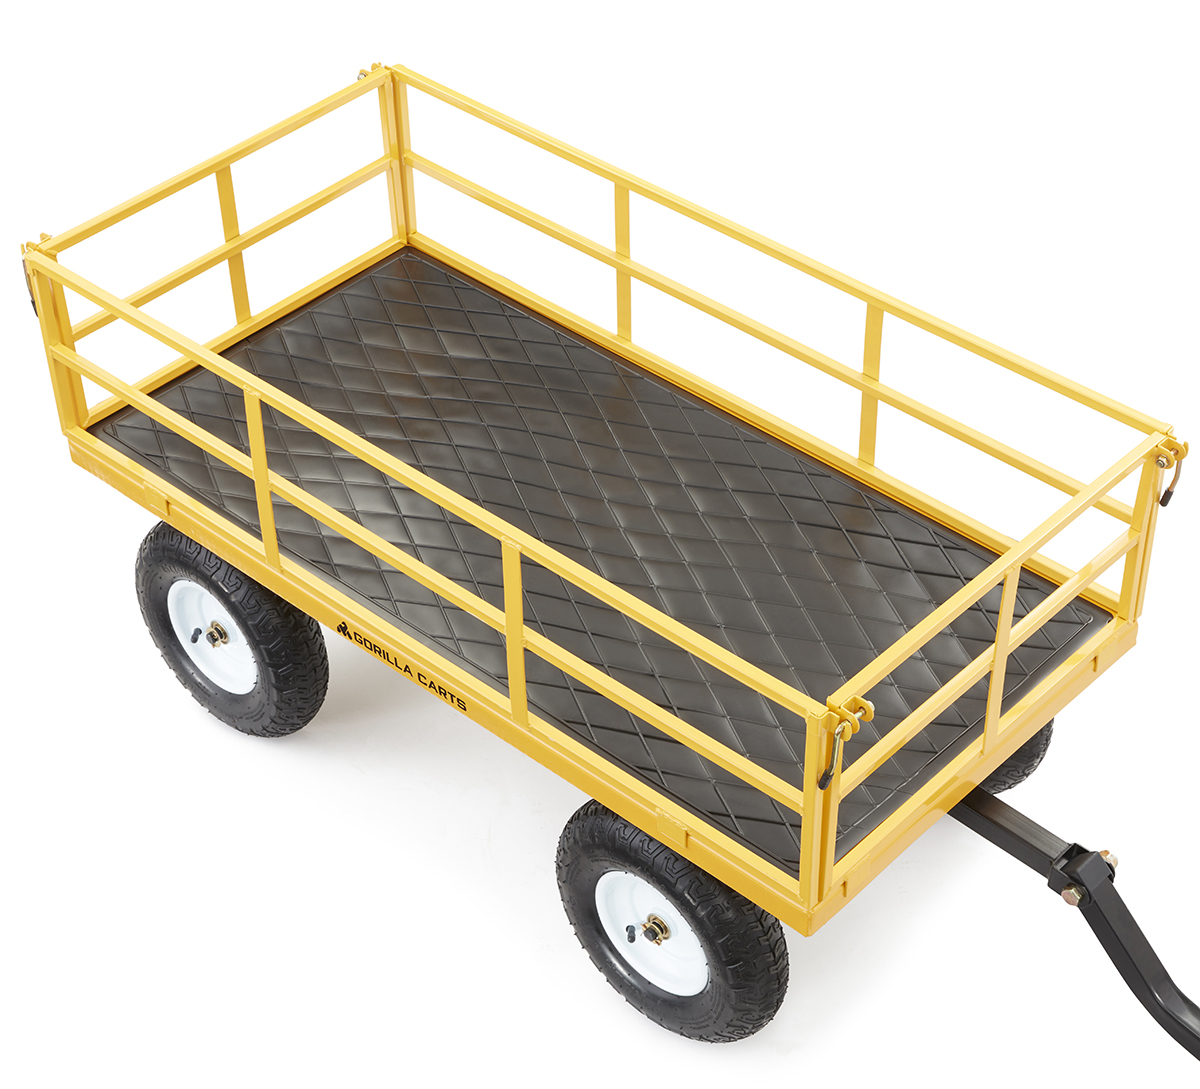 Utility Cart 1,200 lb Heavy Duty Steel Removable Side Panels Convertible Handle